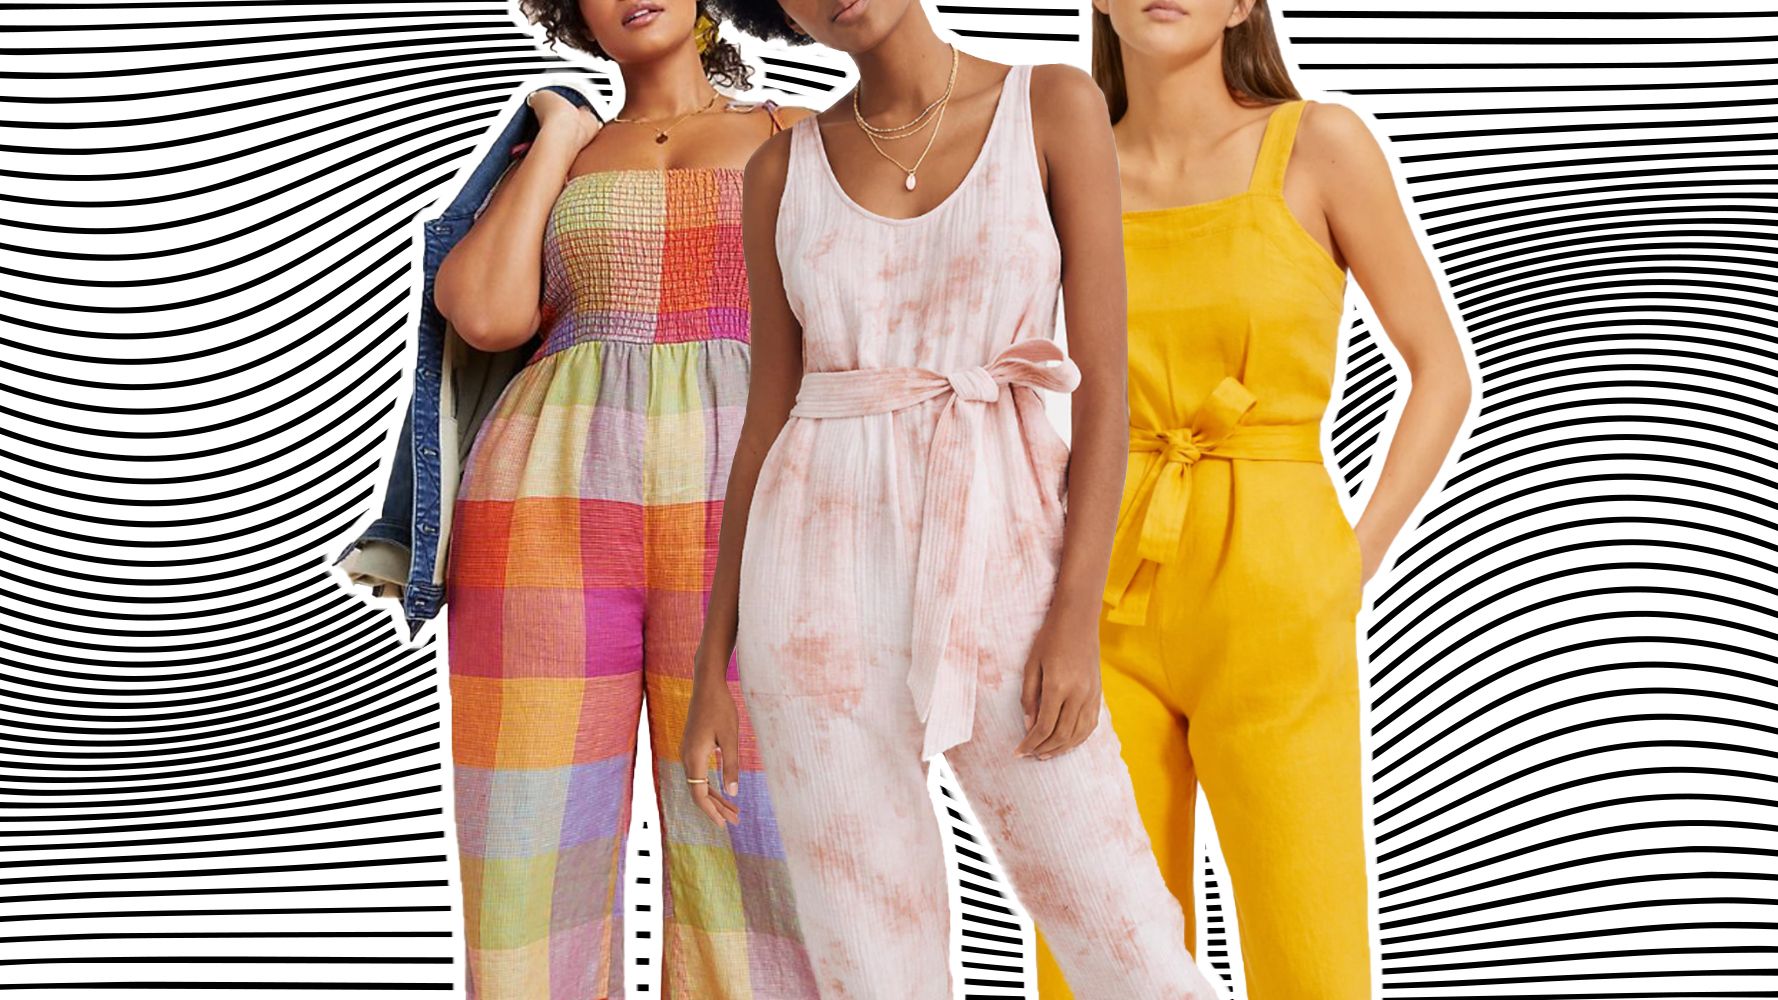 22 Comfy Jumpsuits That Can Be Loungewear or Brunch Attire Marie Claire (US)